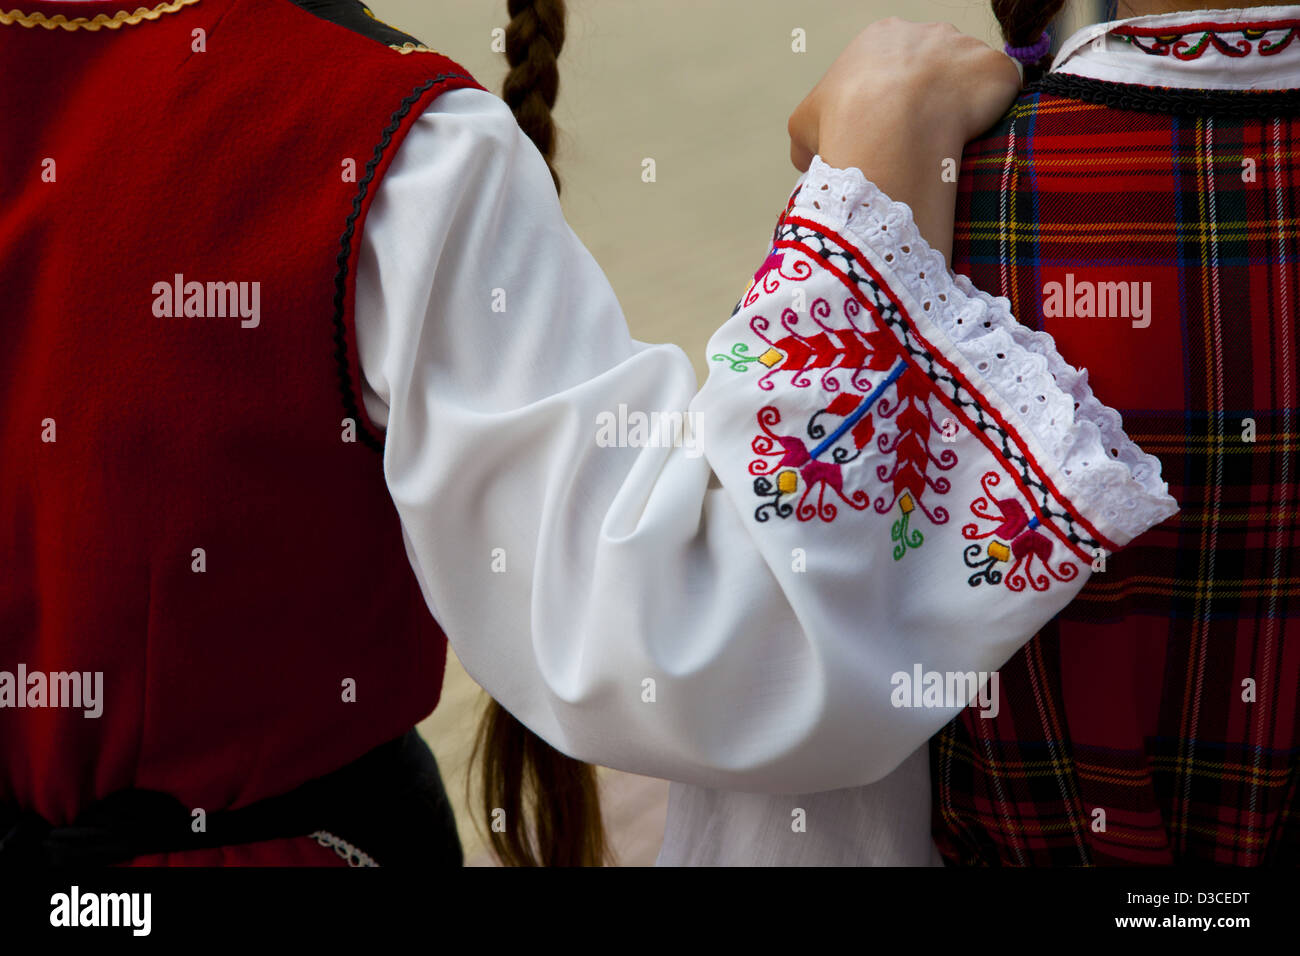 Bulgaria, Europe, Kazanlak, Valley Of The Roses, Flower Festival Parade, Two Local Girls Wearing Traditional Costumes. Stock Photo